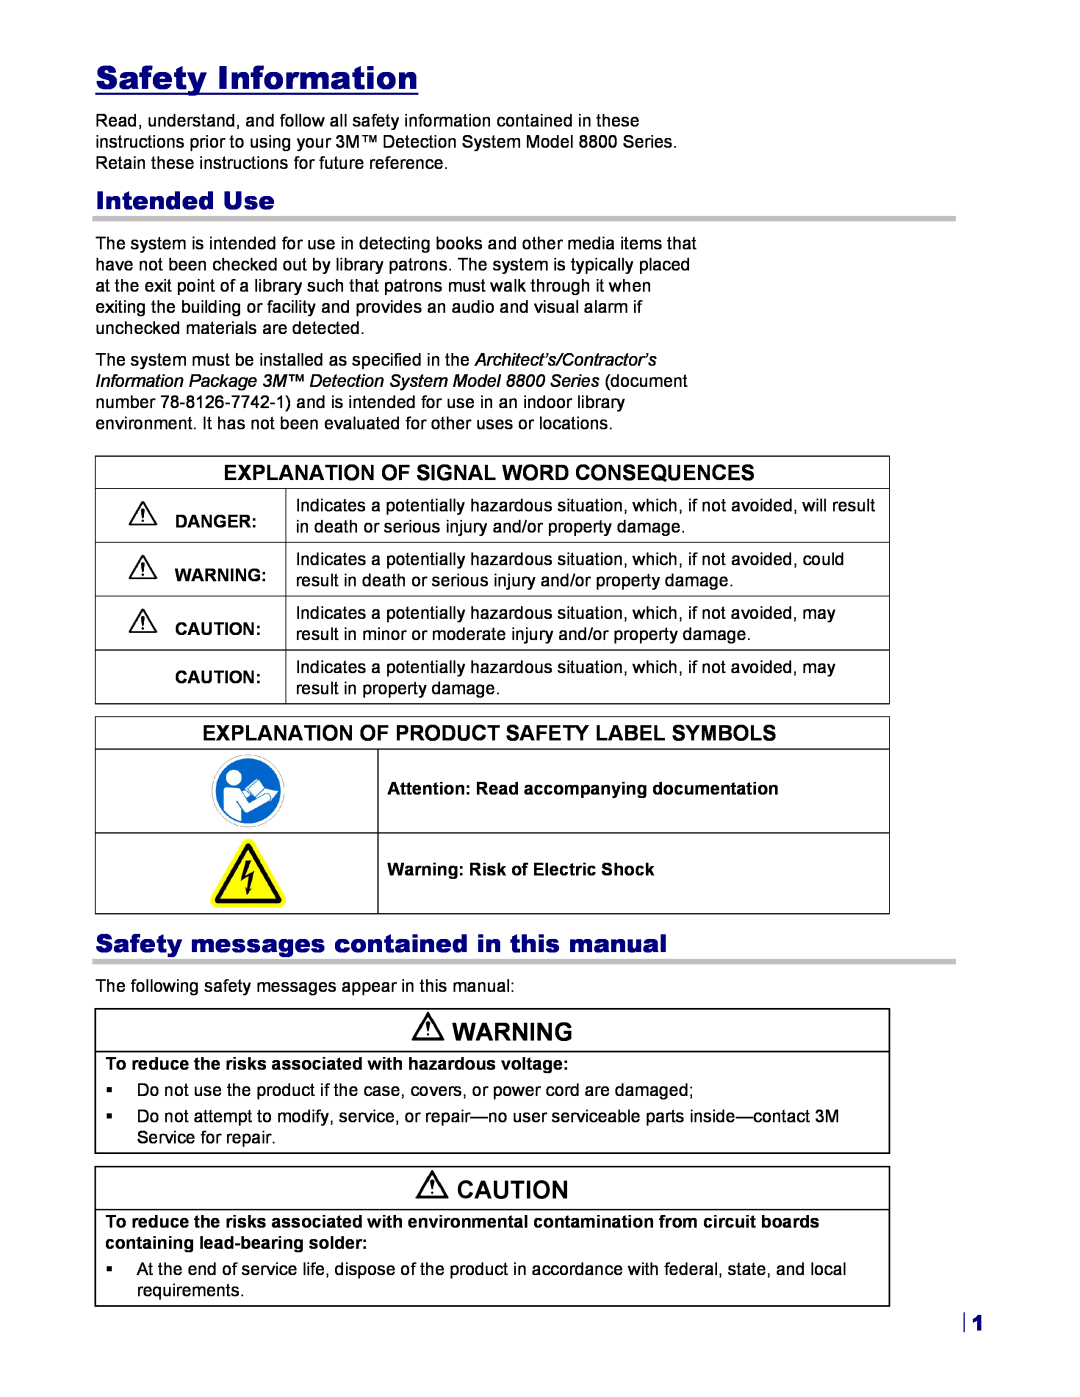 3M 8800 Series owner manual Safety Information, Intended Use, Safety messages contained in this manual 